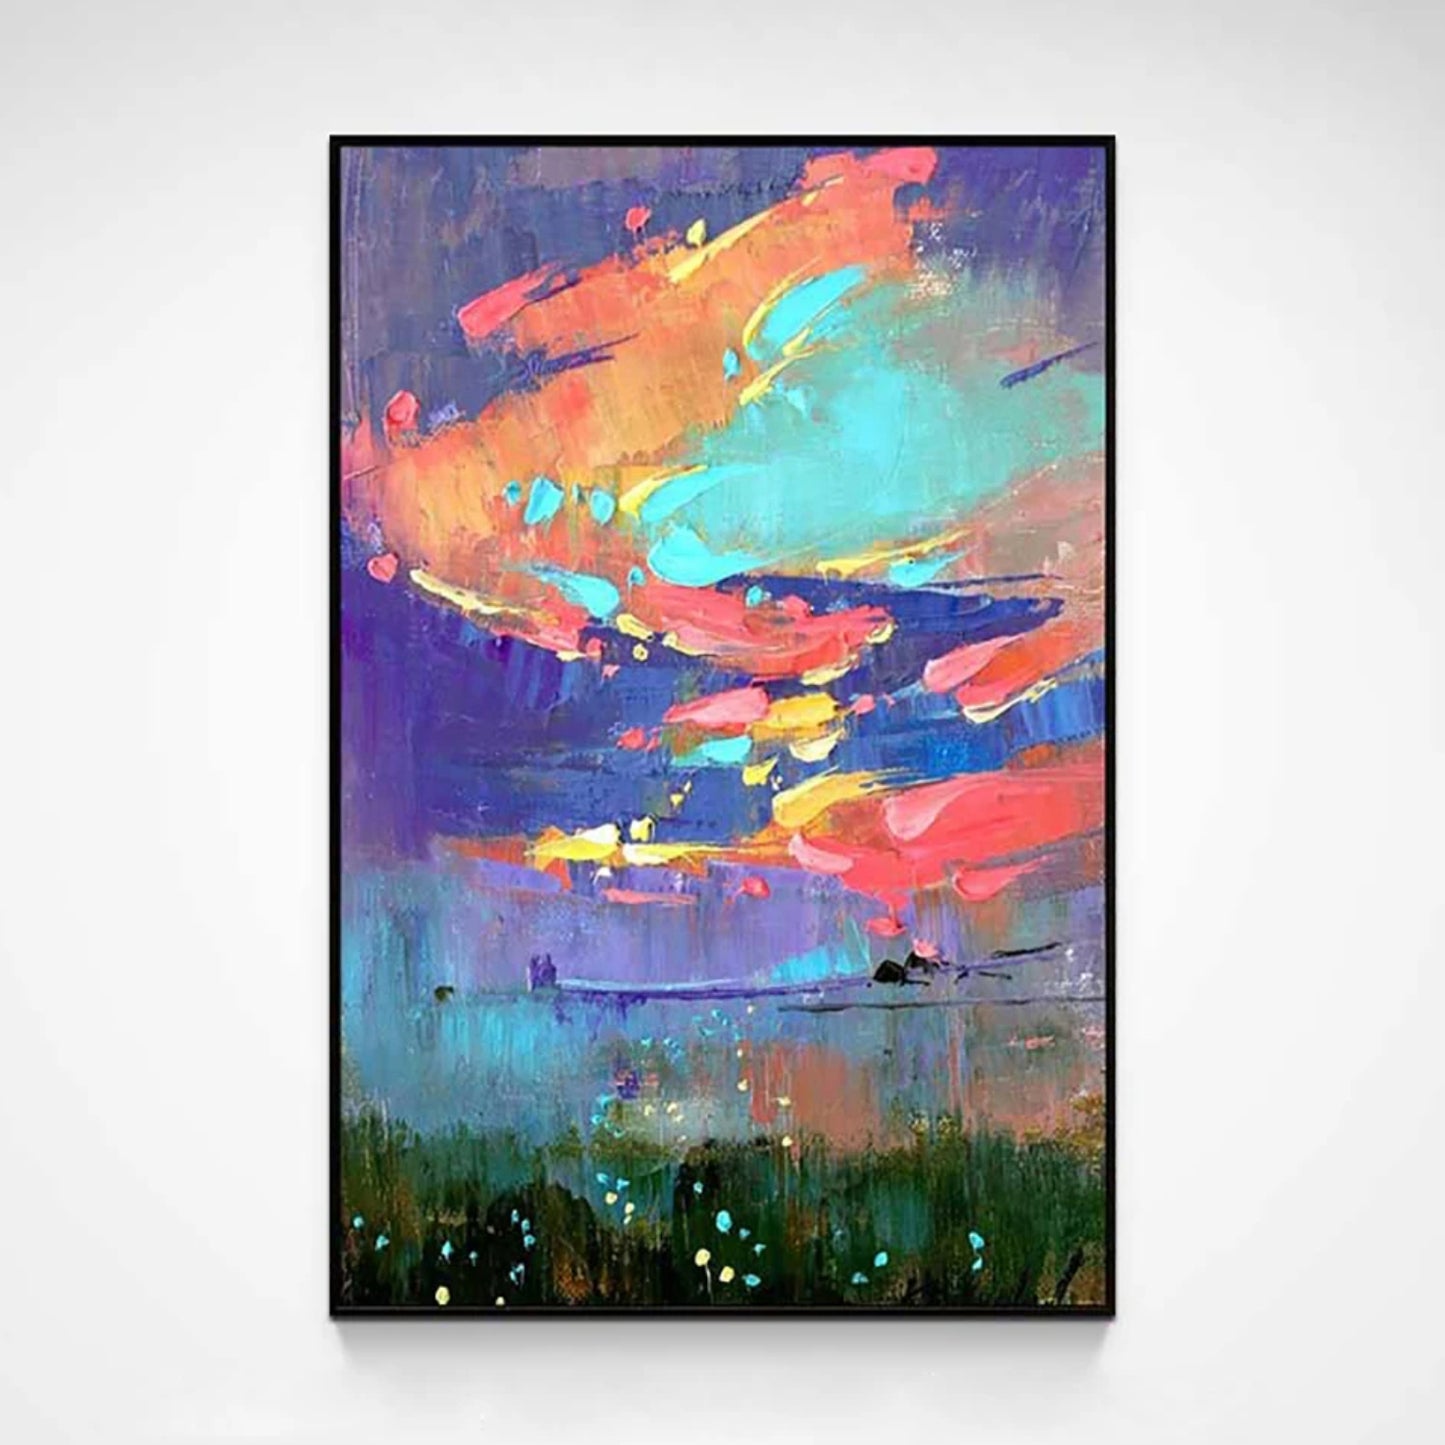 Vivid Dreamy Sky with Colourful Clouds Modern Painting